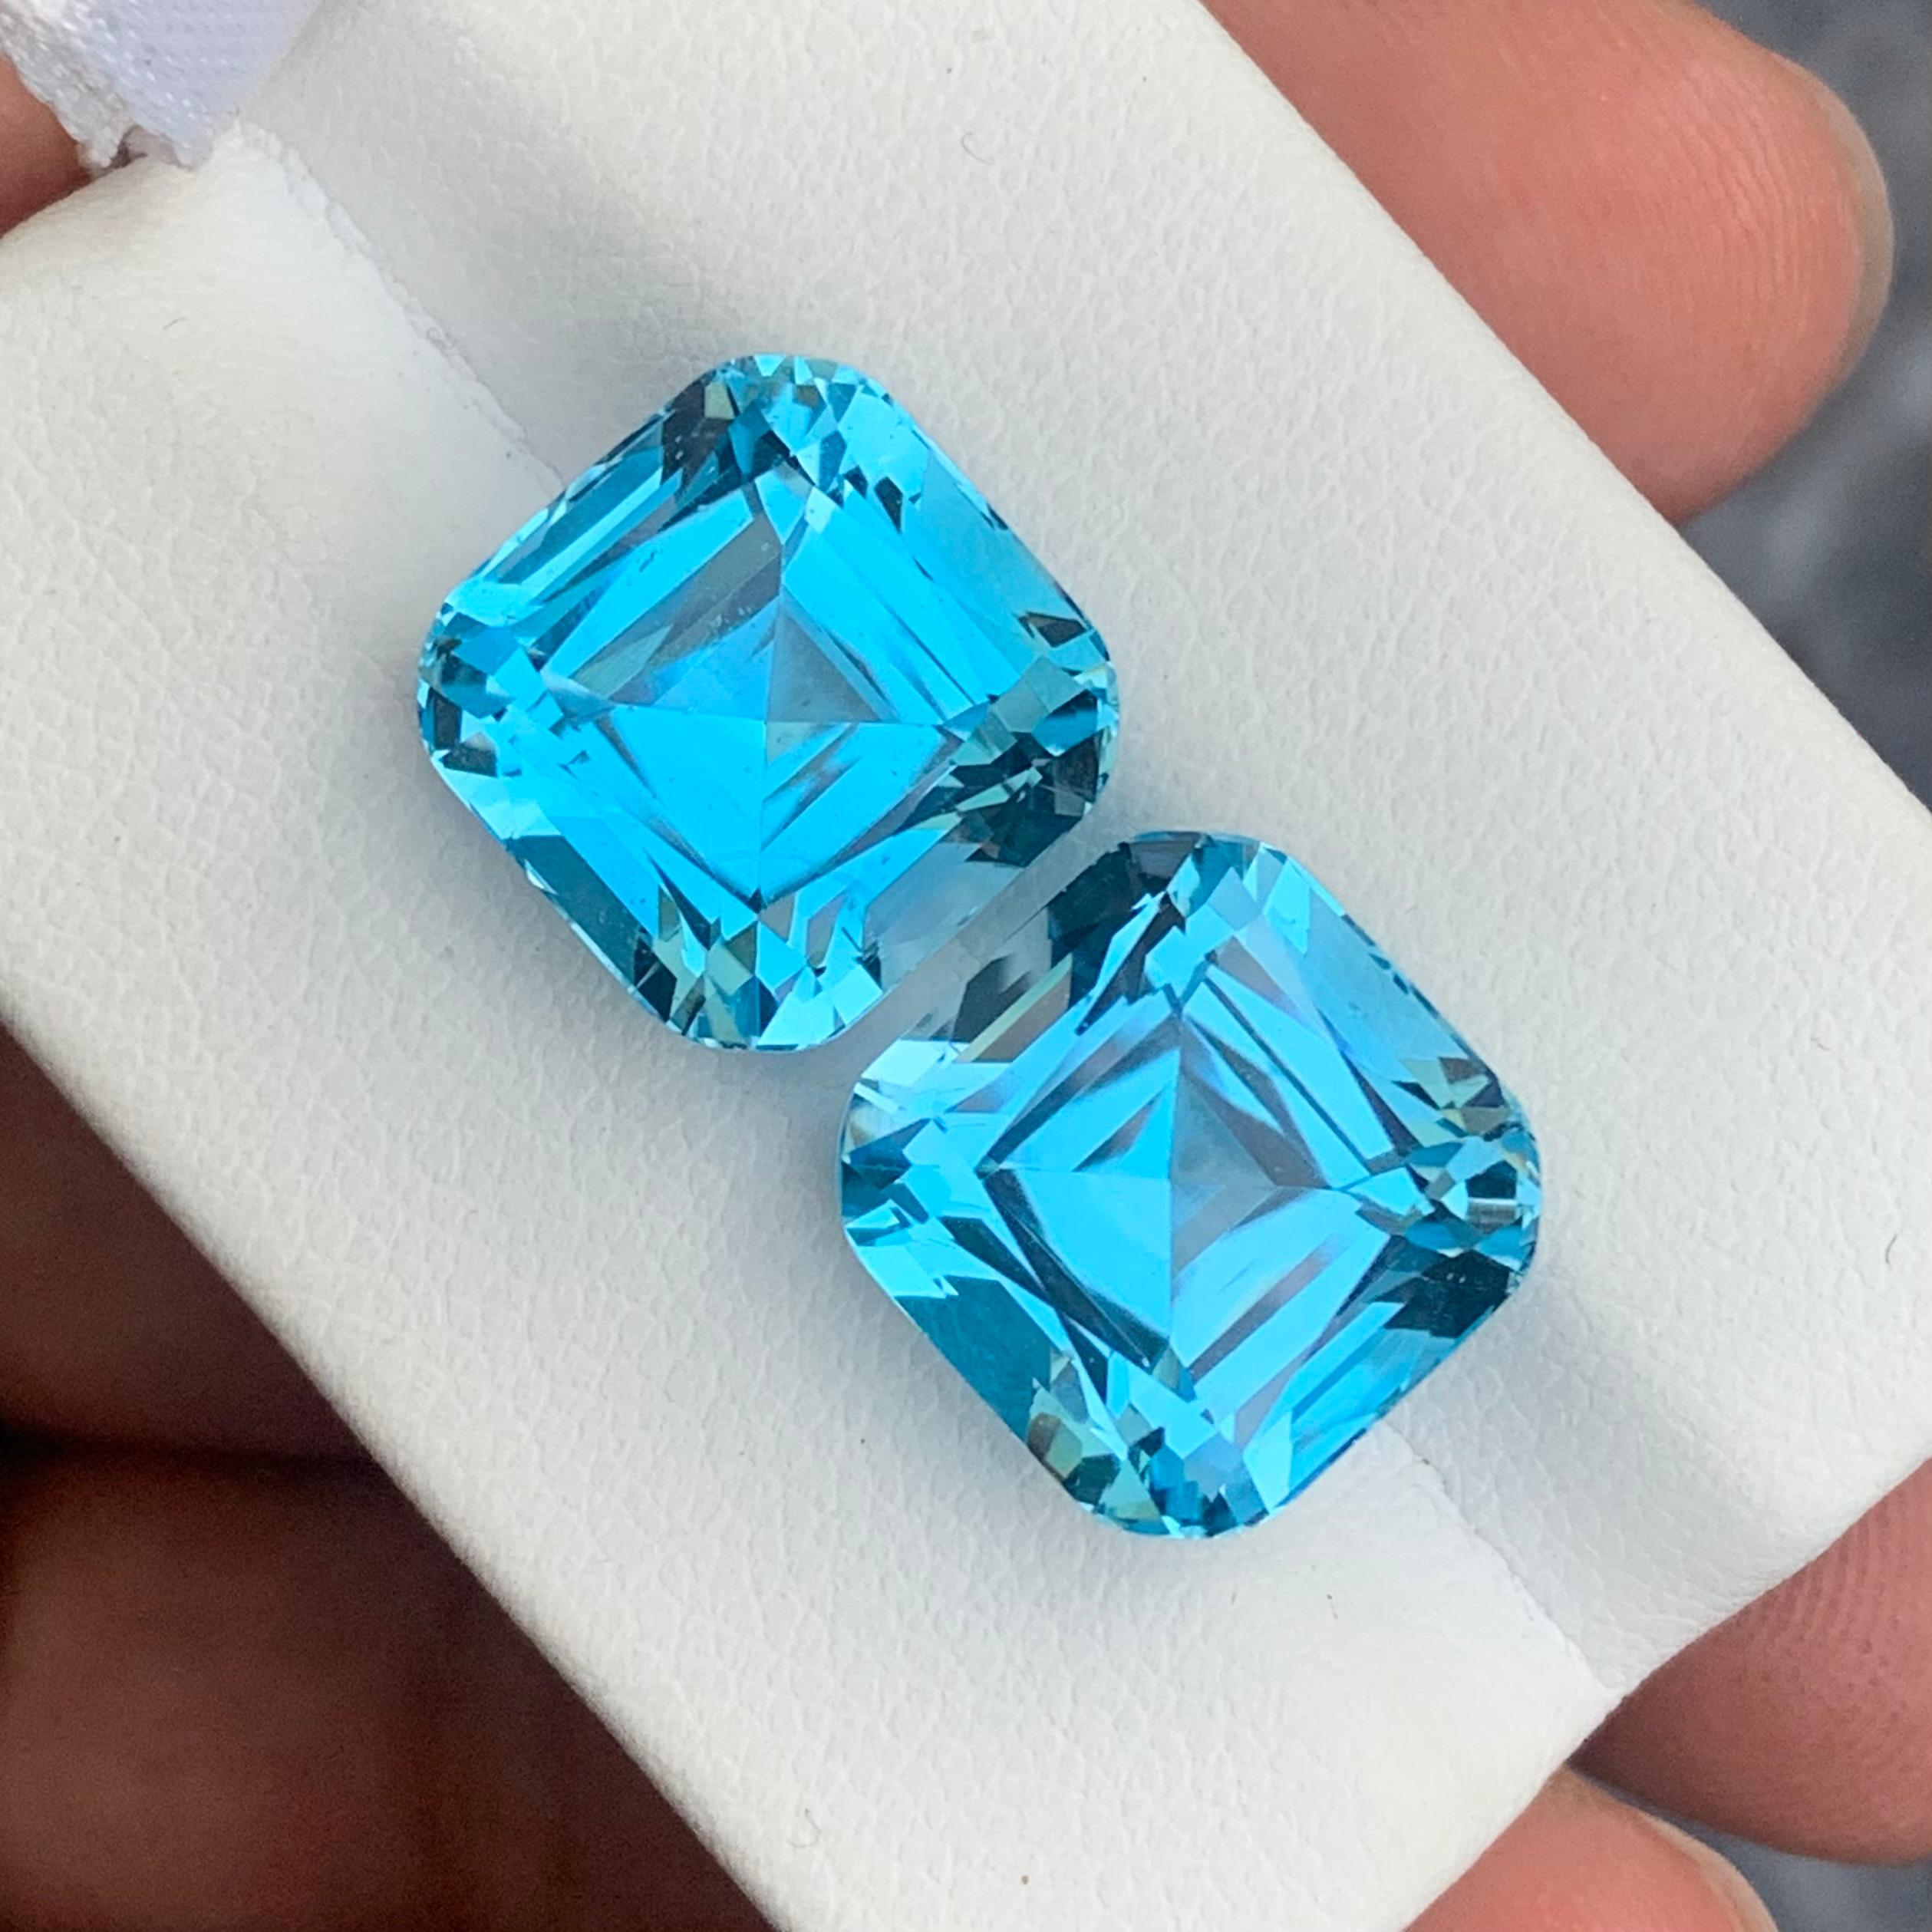 Women's or Men's Exceptional Gorgeous Loose Sky Blue Topaz Pairs 25.40 Carat For Earrings Jewelry For Sale